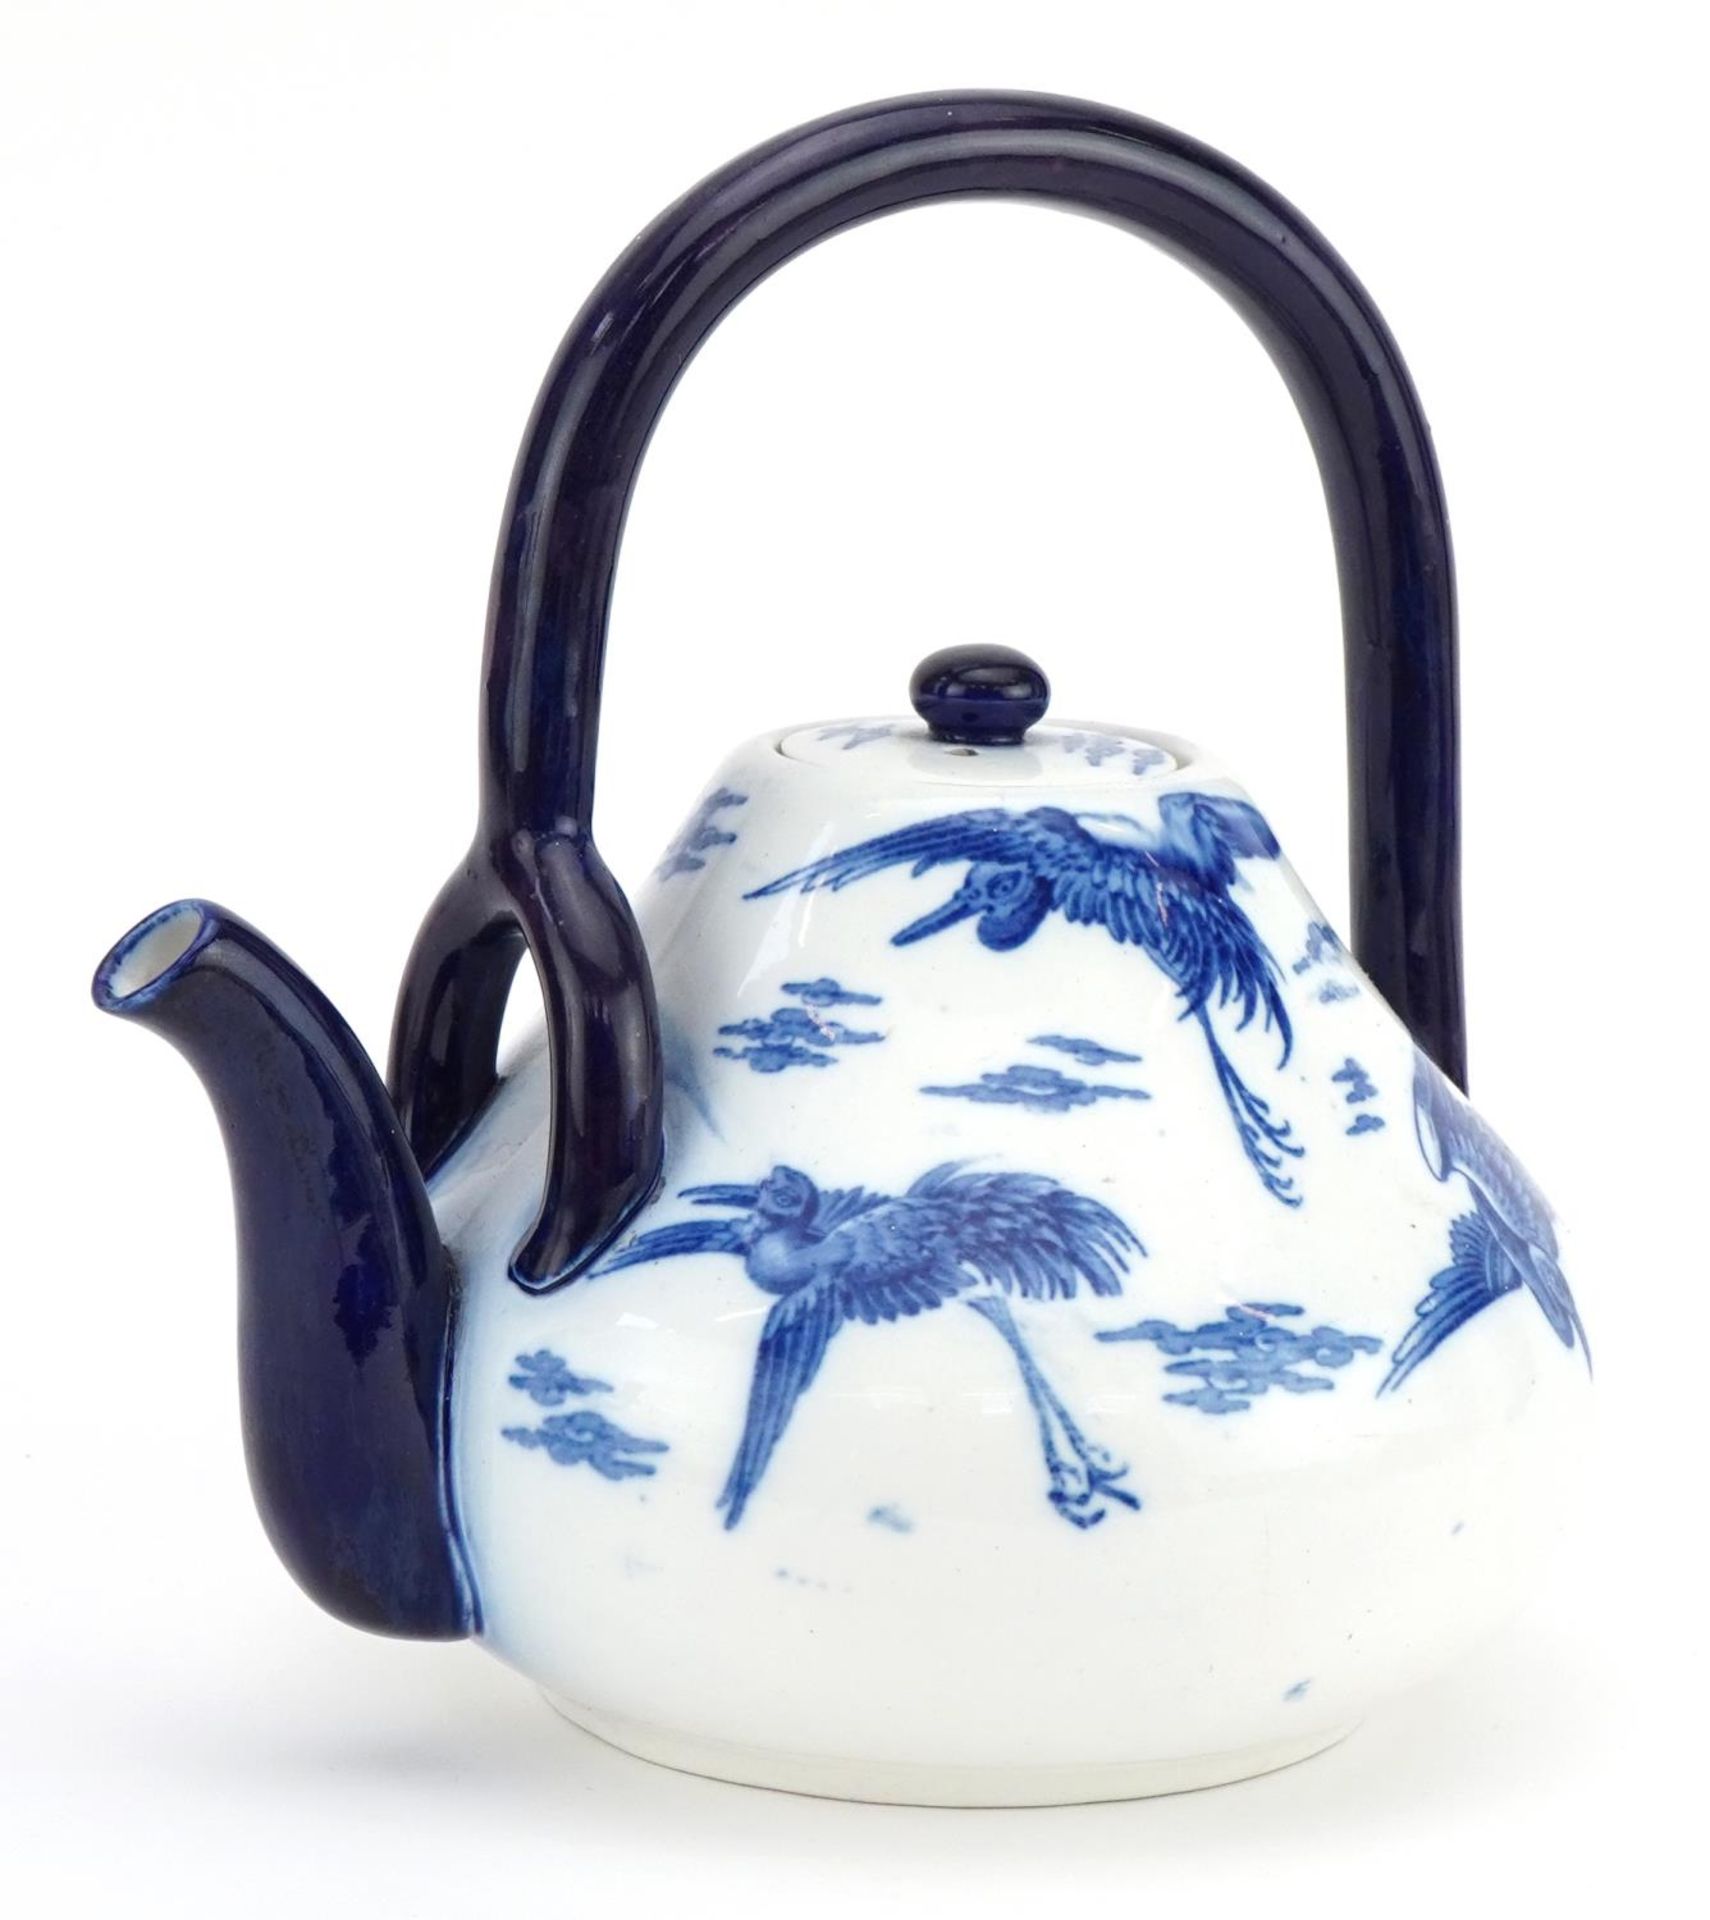 Attributed to Christopher Dresser for Minton, Victorian aesthetic teapot decorated with cranes